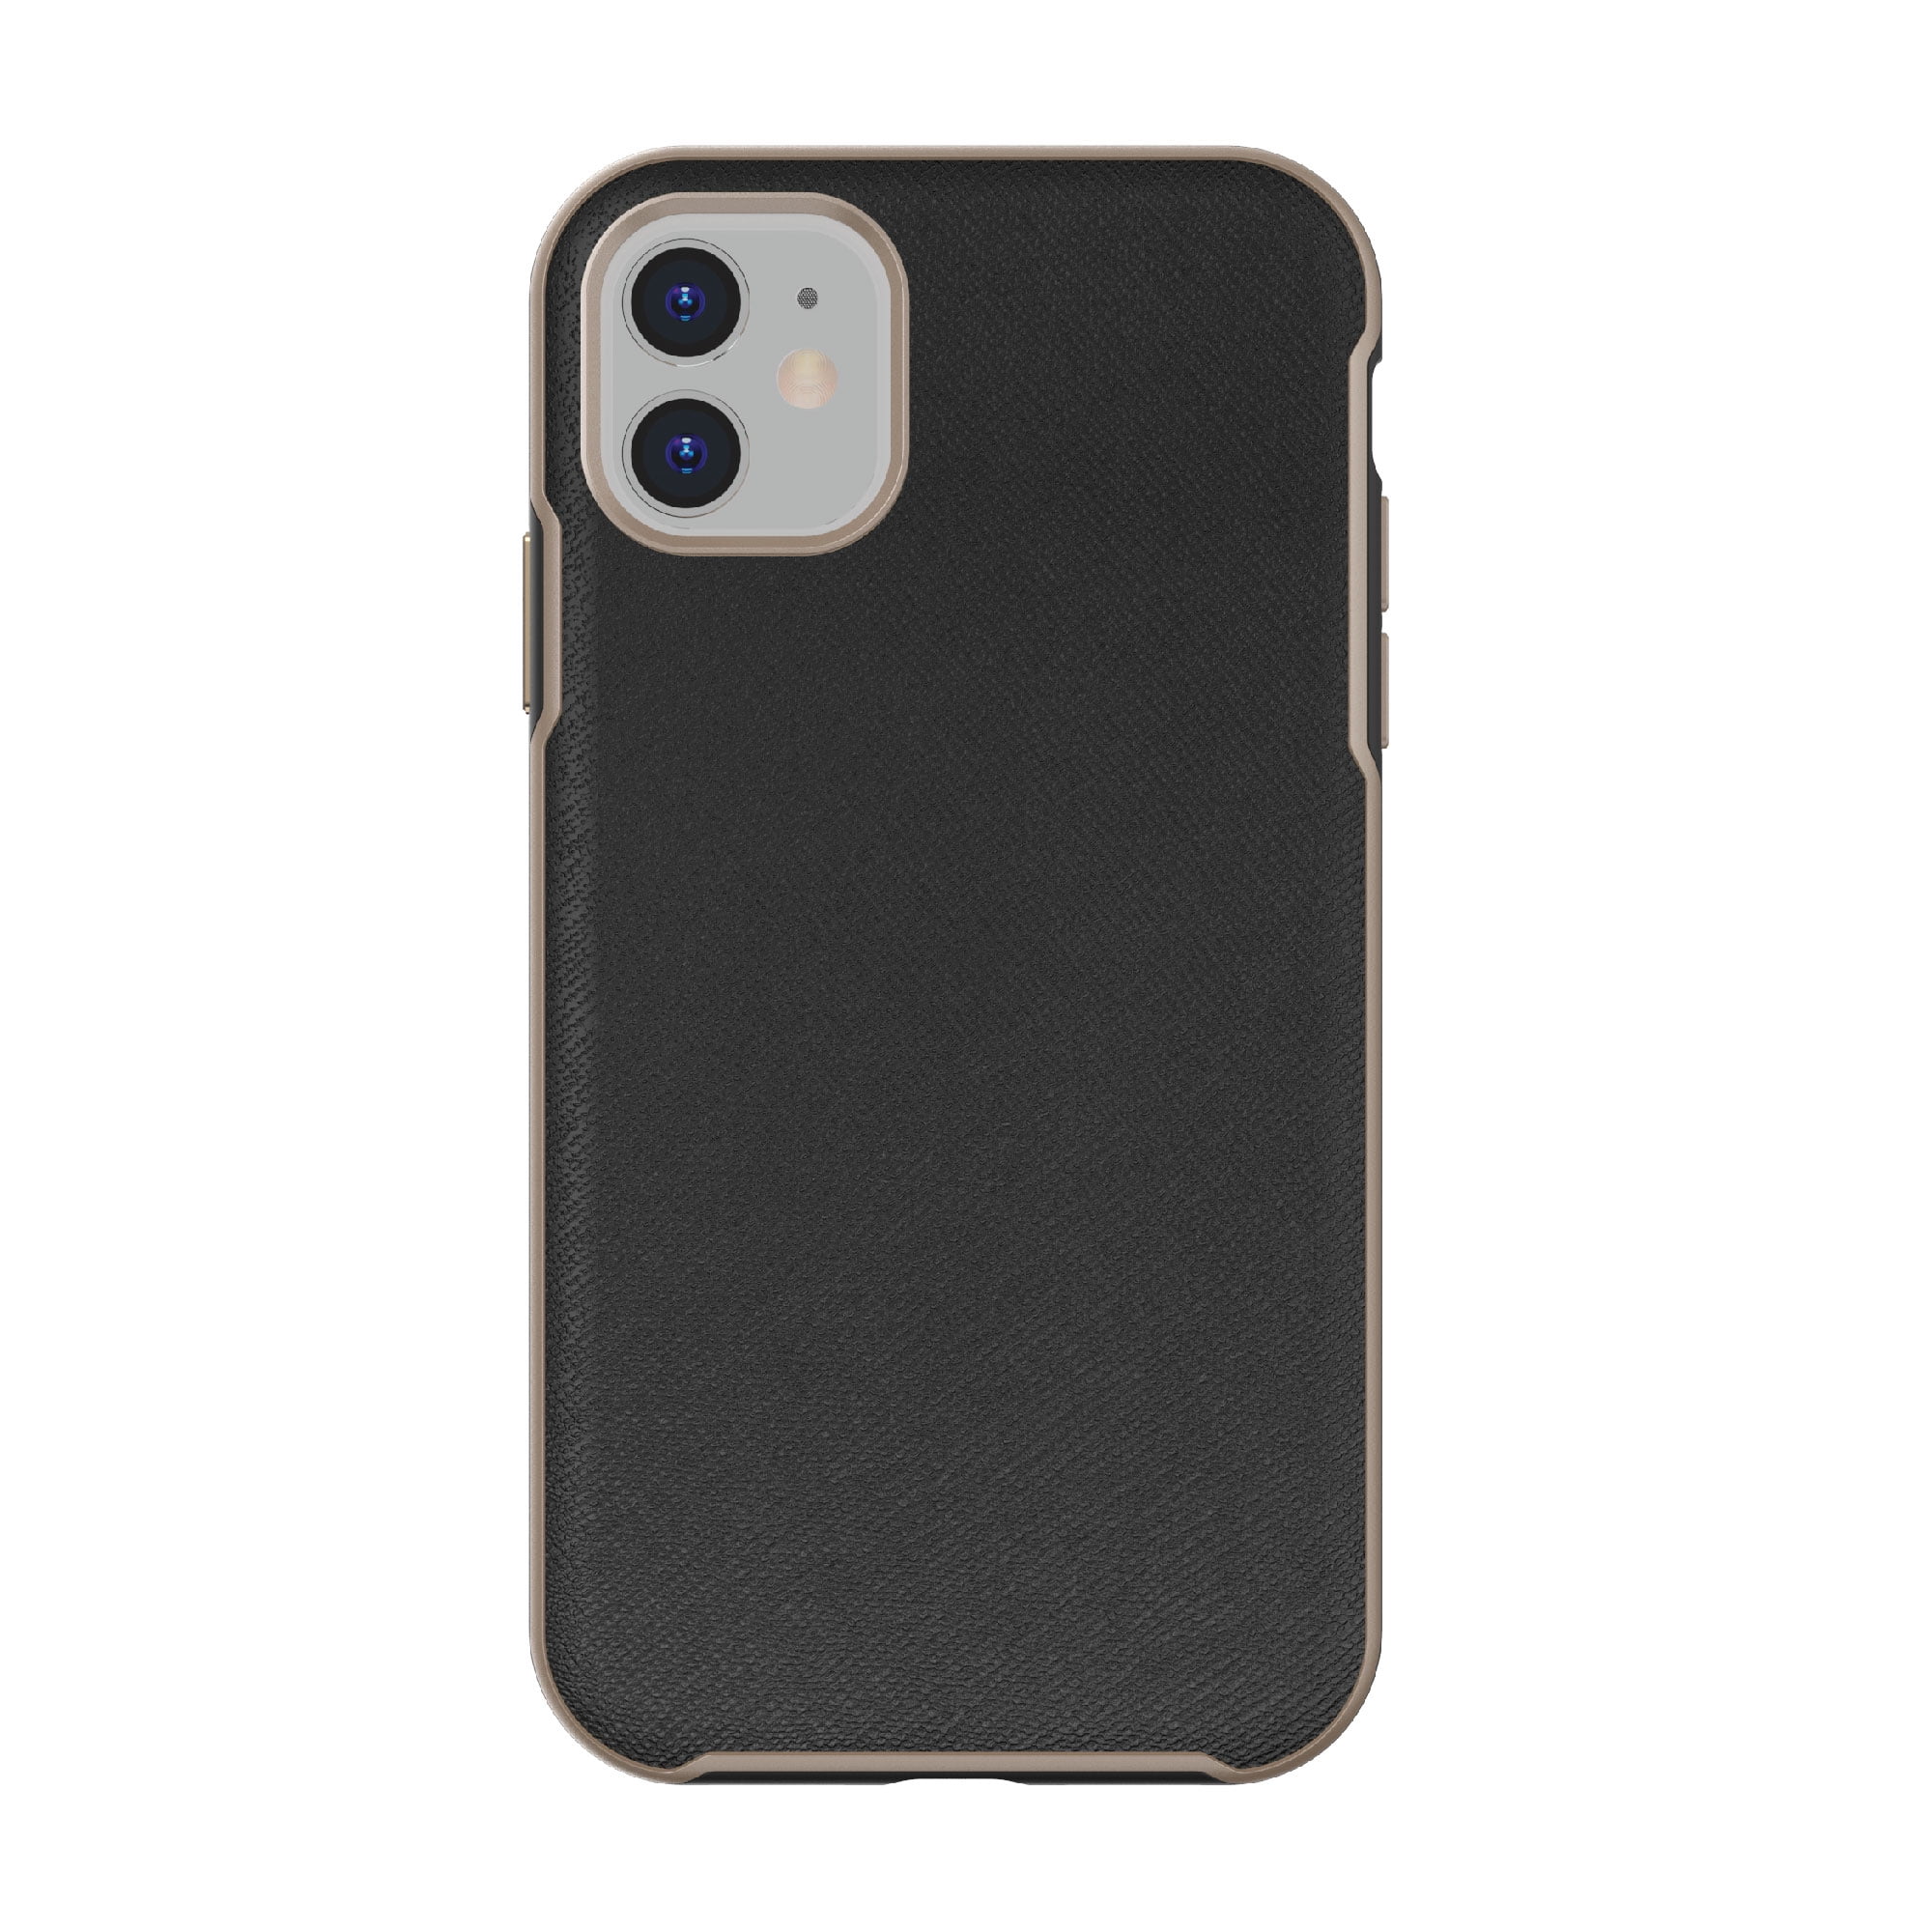 onn. Vegan Leather with Gold Metallic Trim Case for iPhone 11/XR, Black